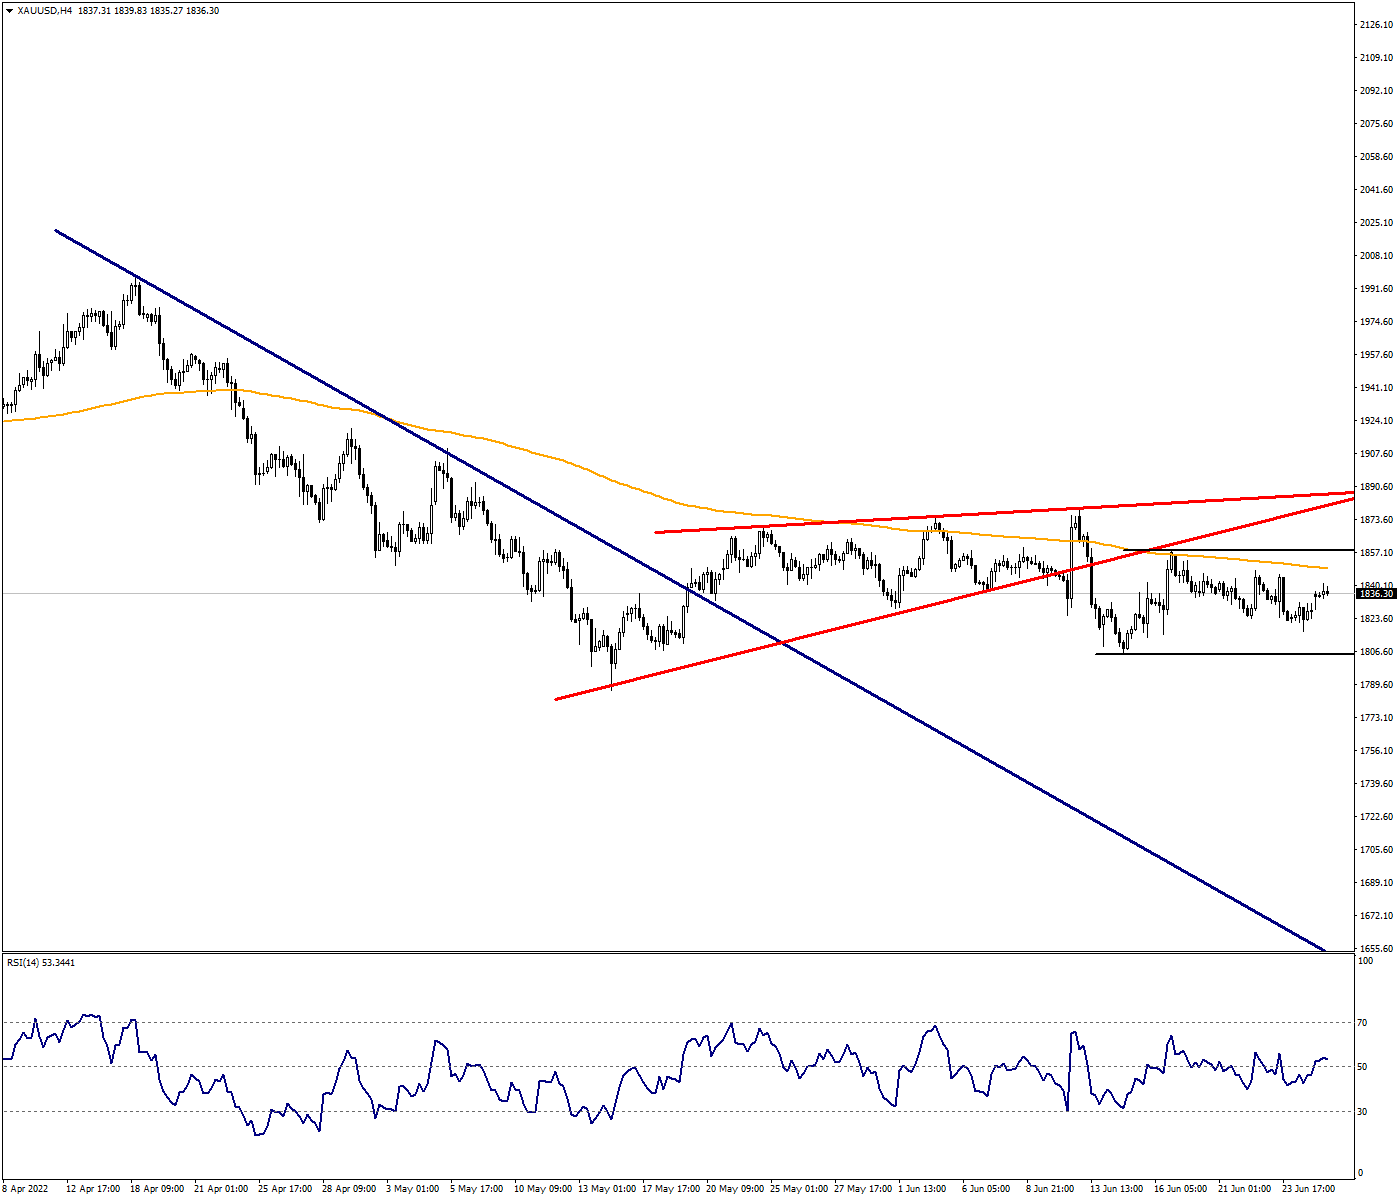 XAUUSD:The Band Movement is Protecting in Ounce Gold